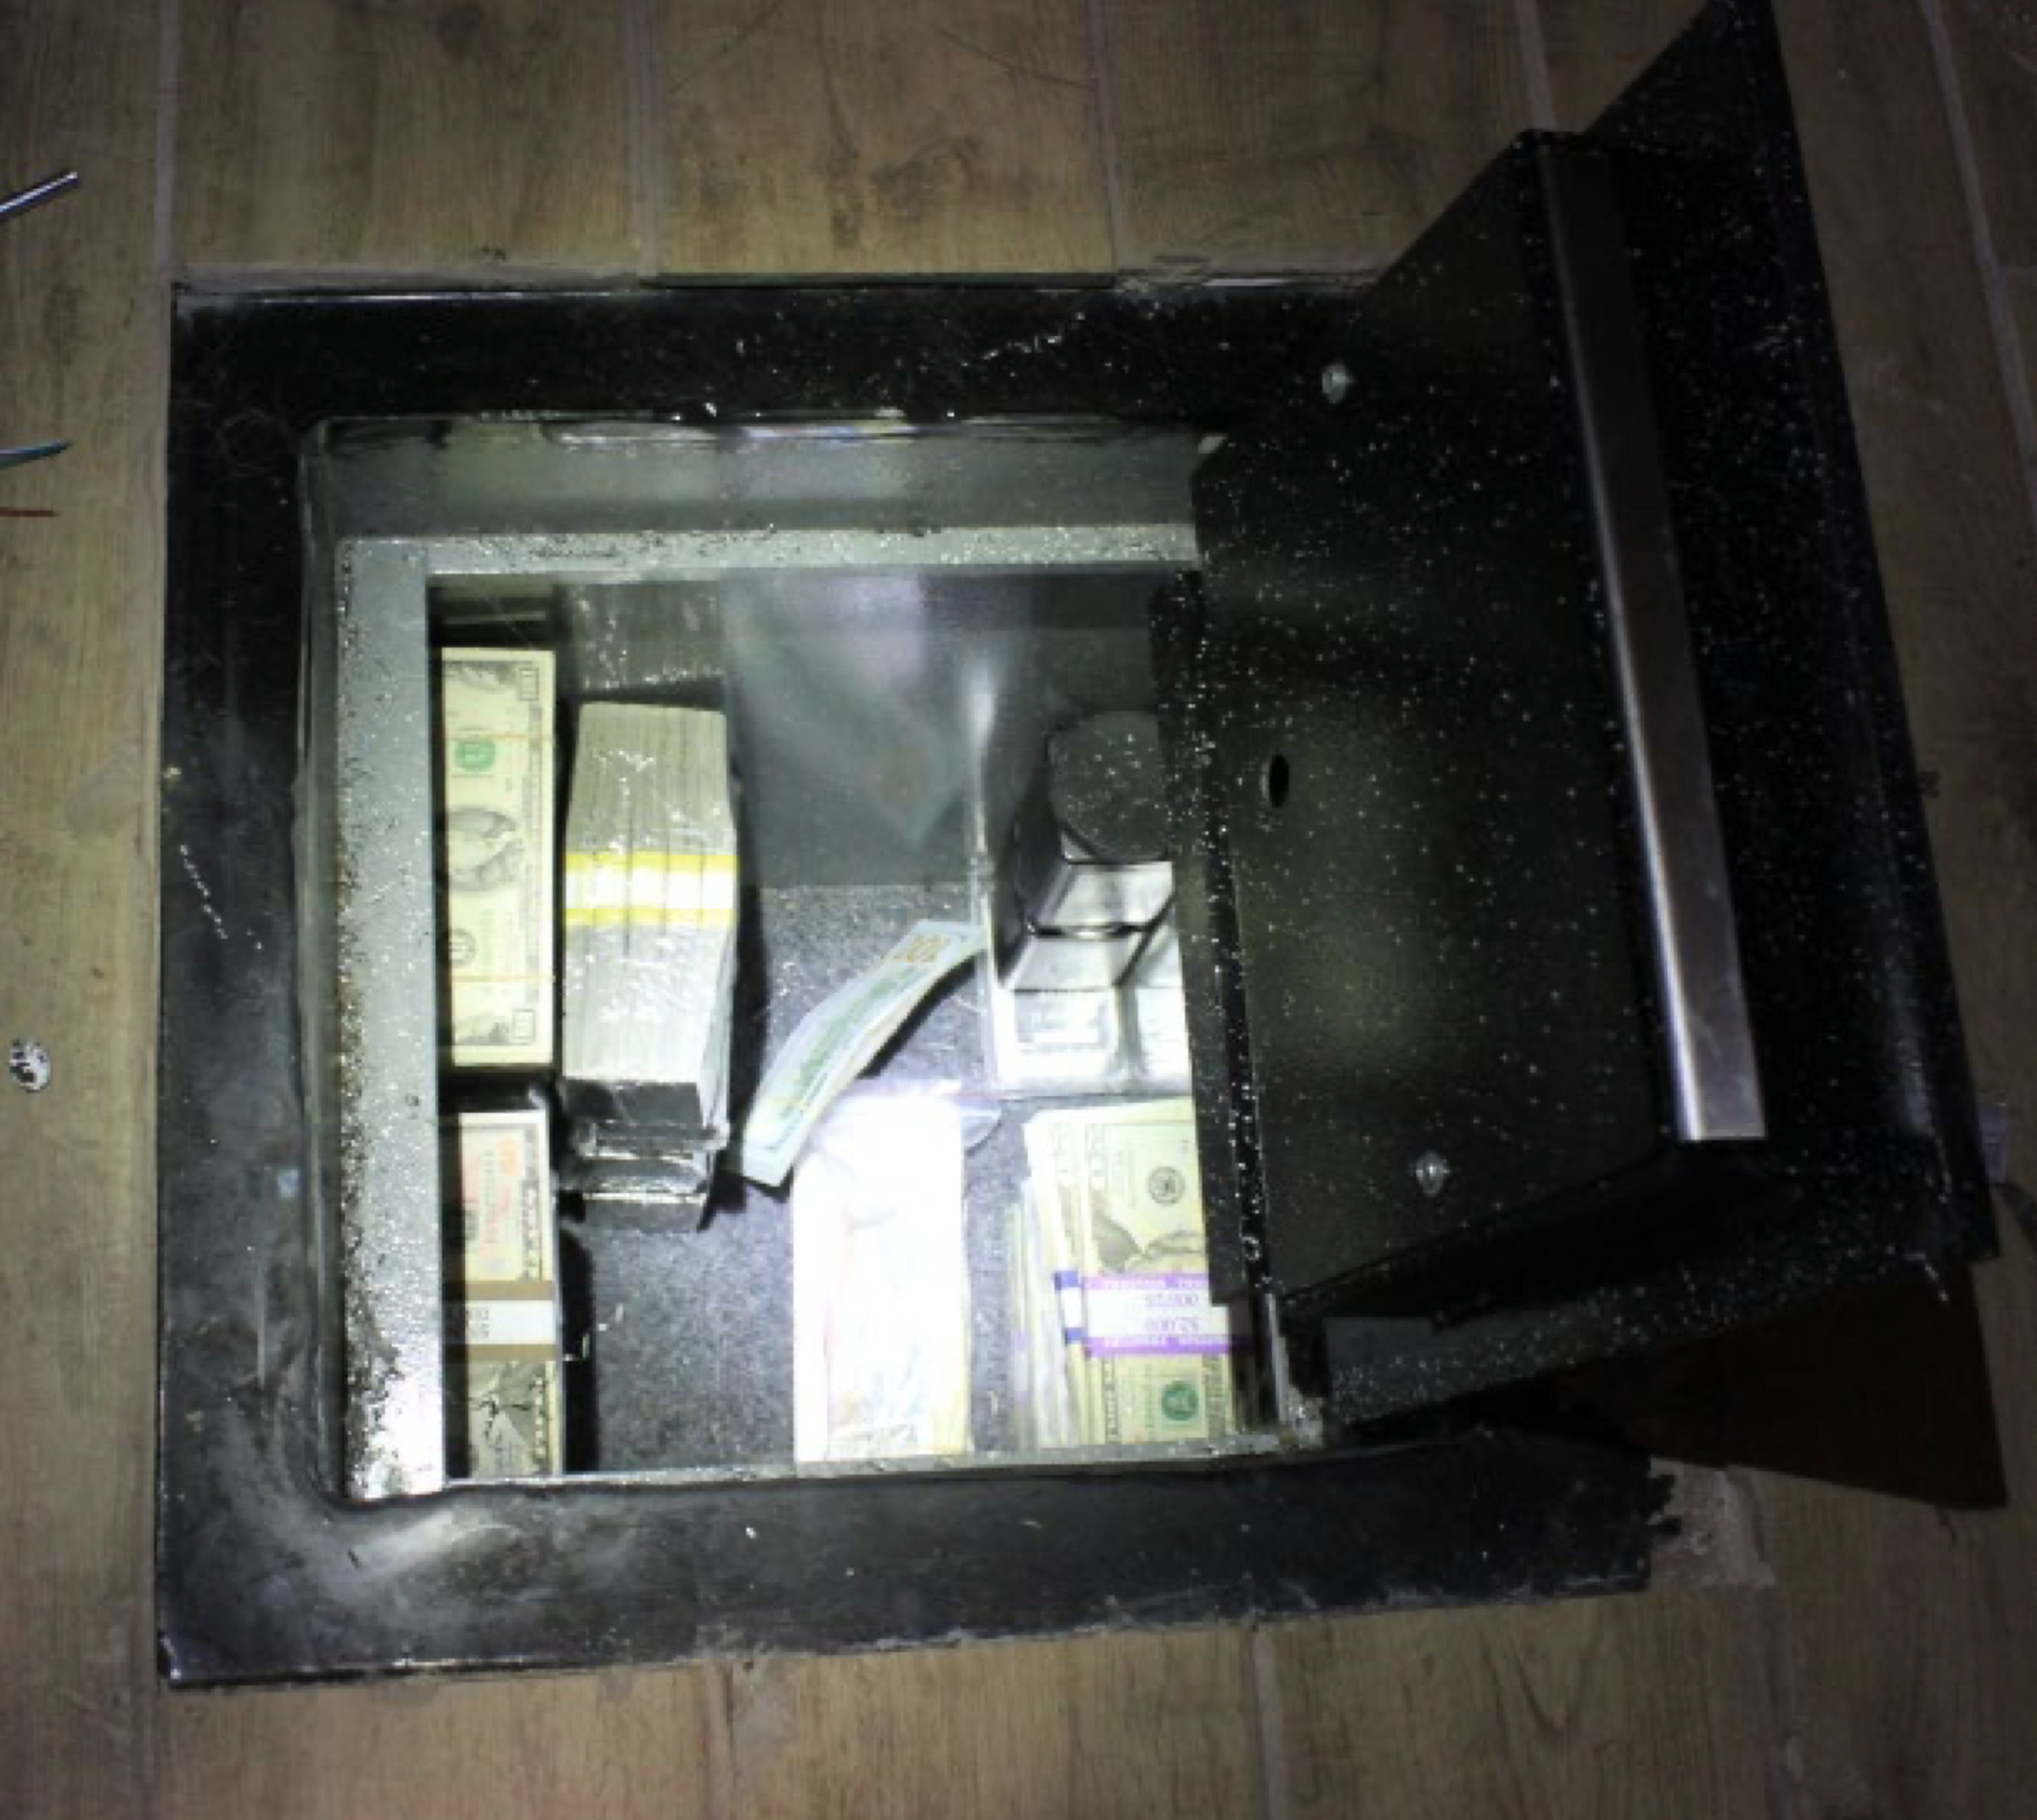 Image of a safe embedded in a wood floor, which contains cash and two metal objects.